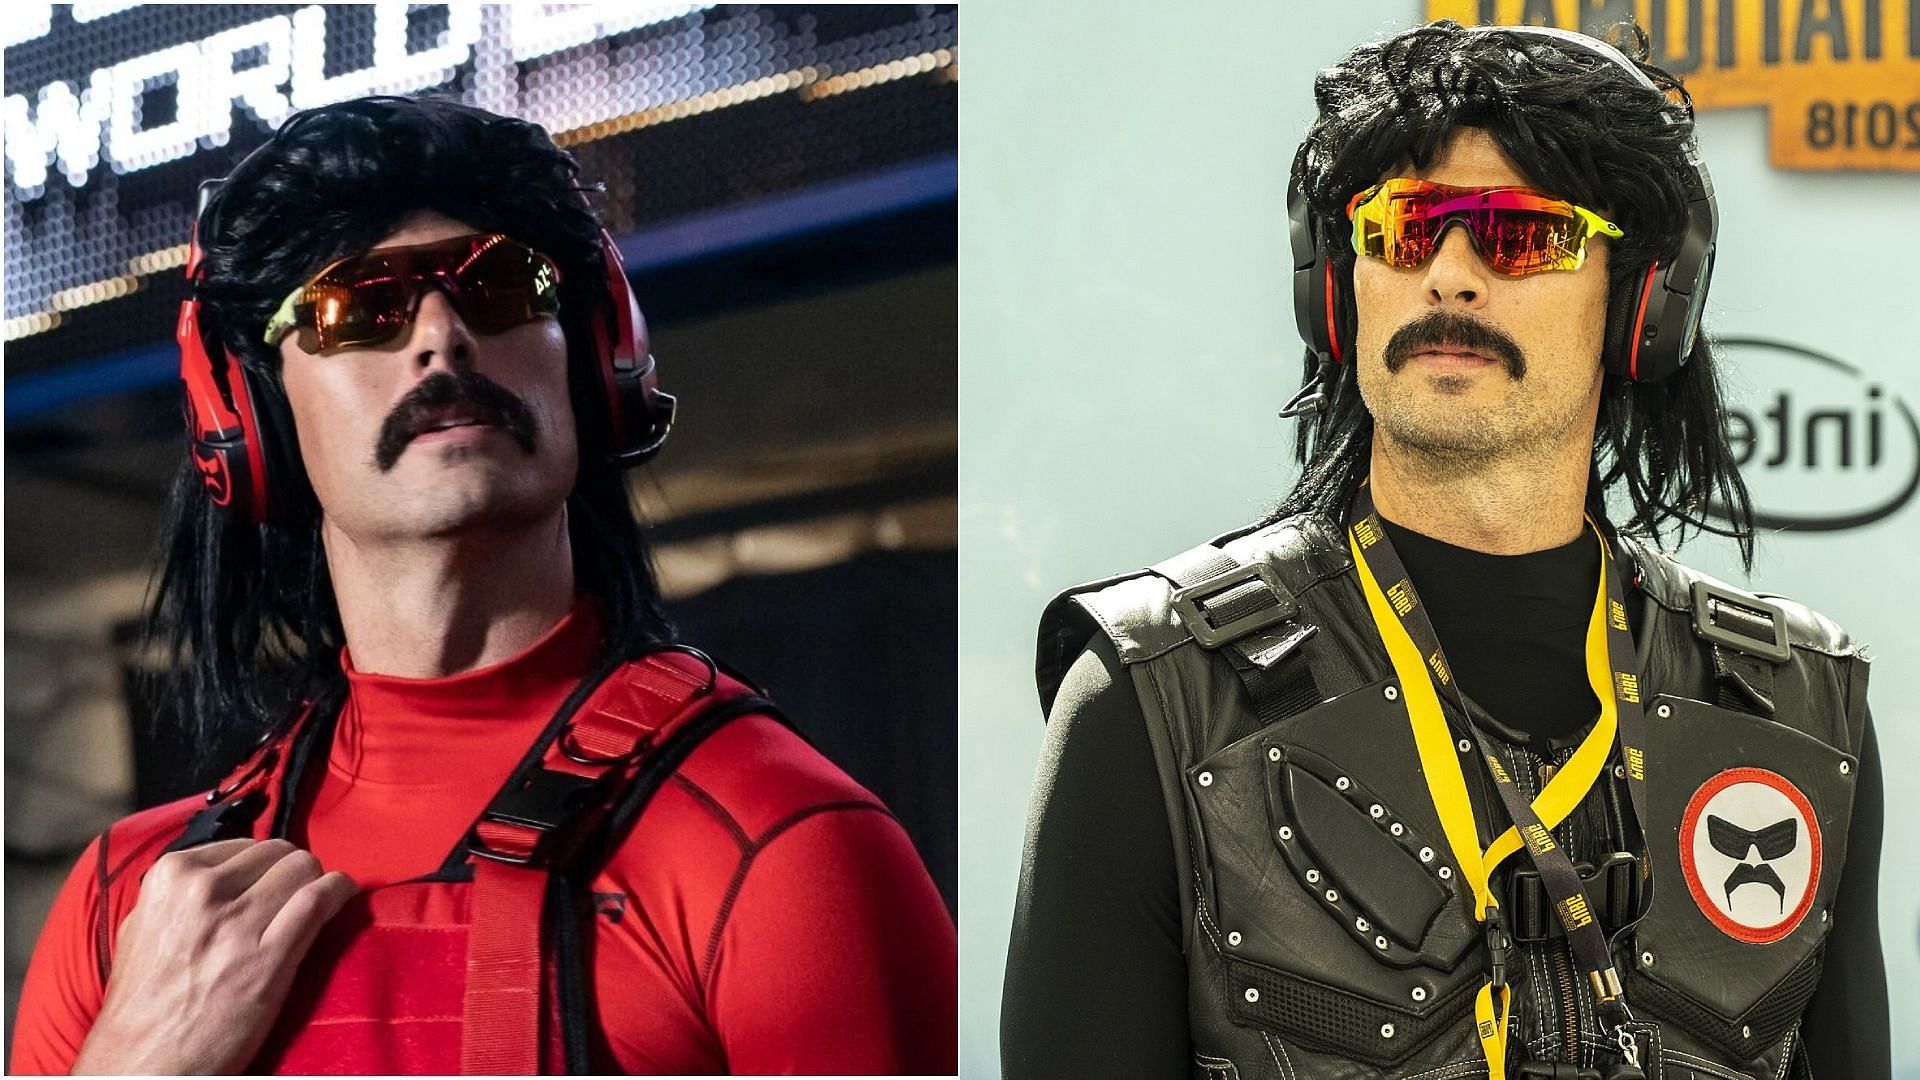 Dr Disrespect's new book: release date, preorder, summary - Dexerto